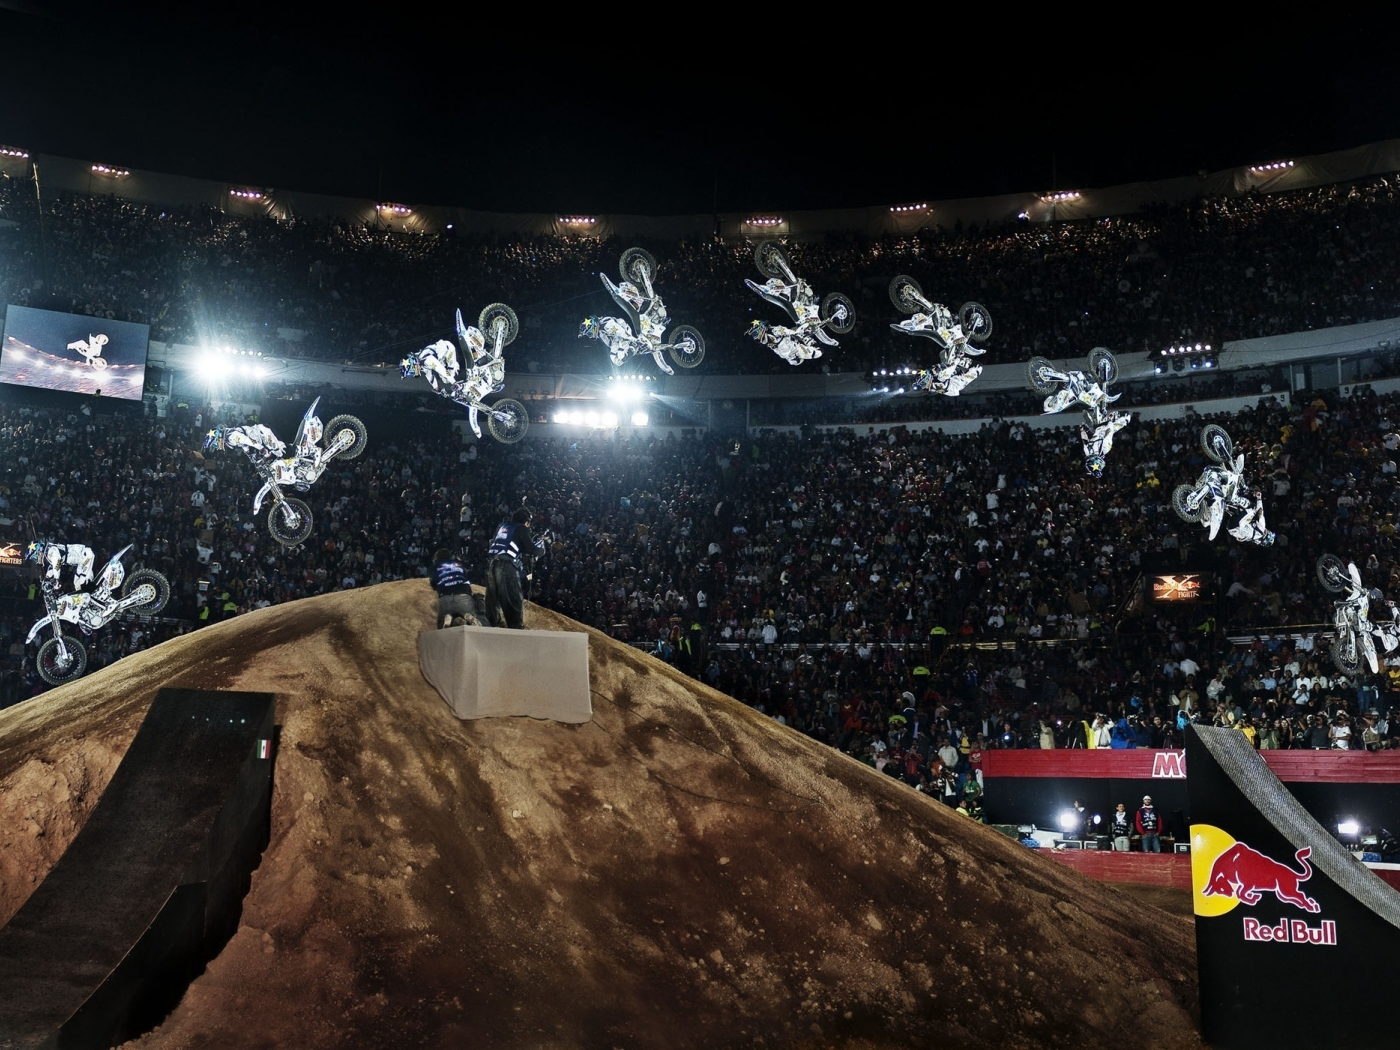 x-games, rome, x-fighters, 2011